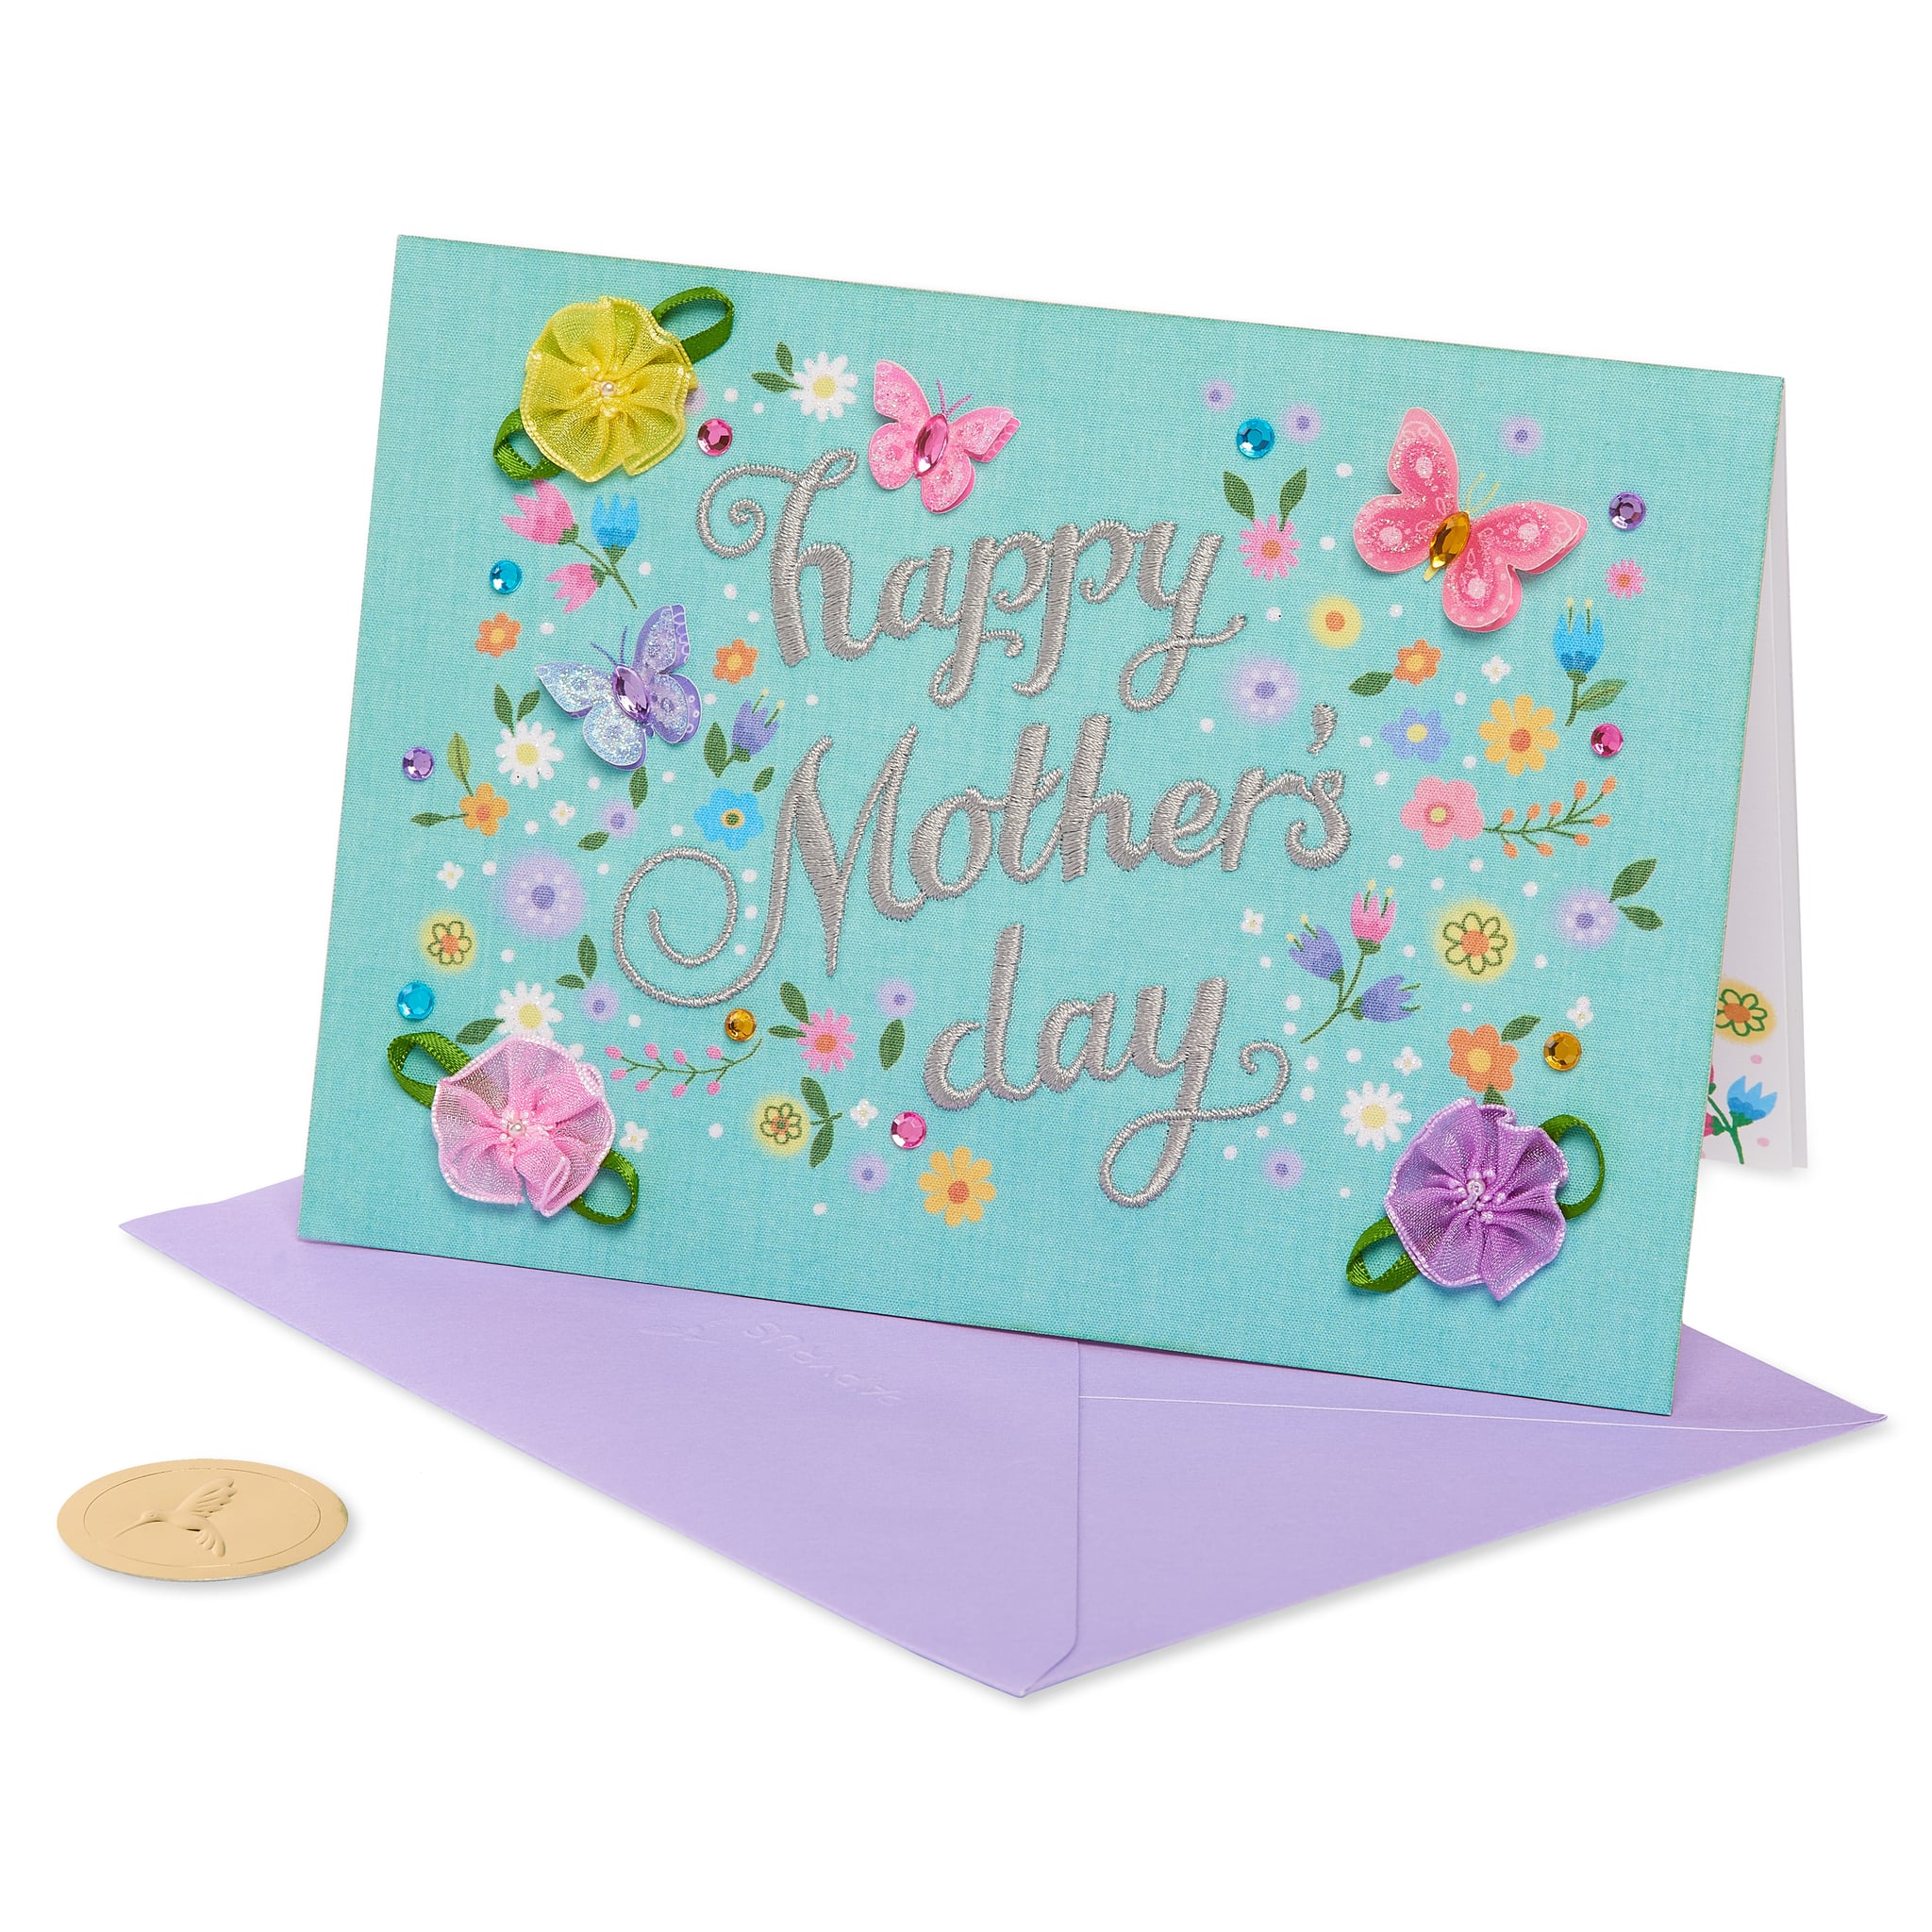 New Papryus Mothers Day Greeting Card Retails For 5.95 